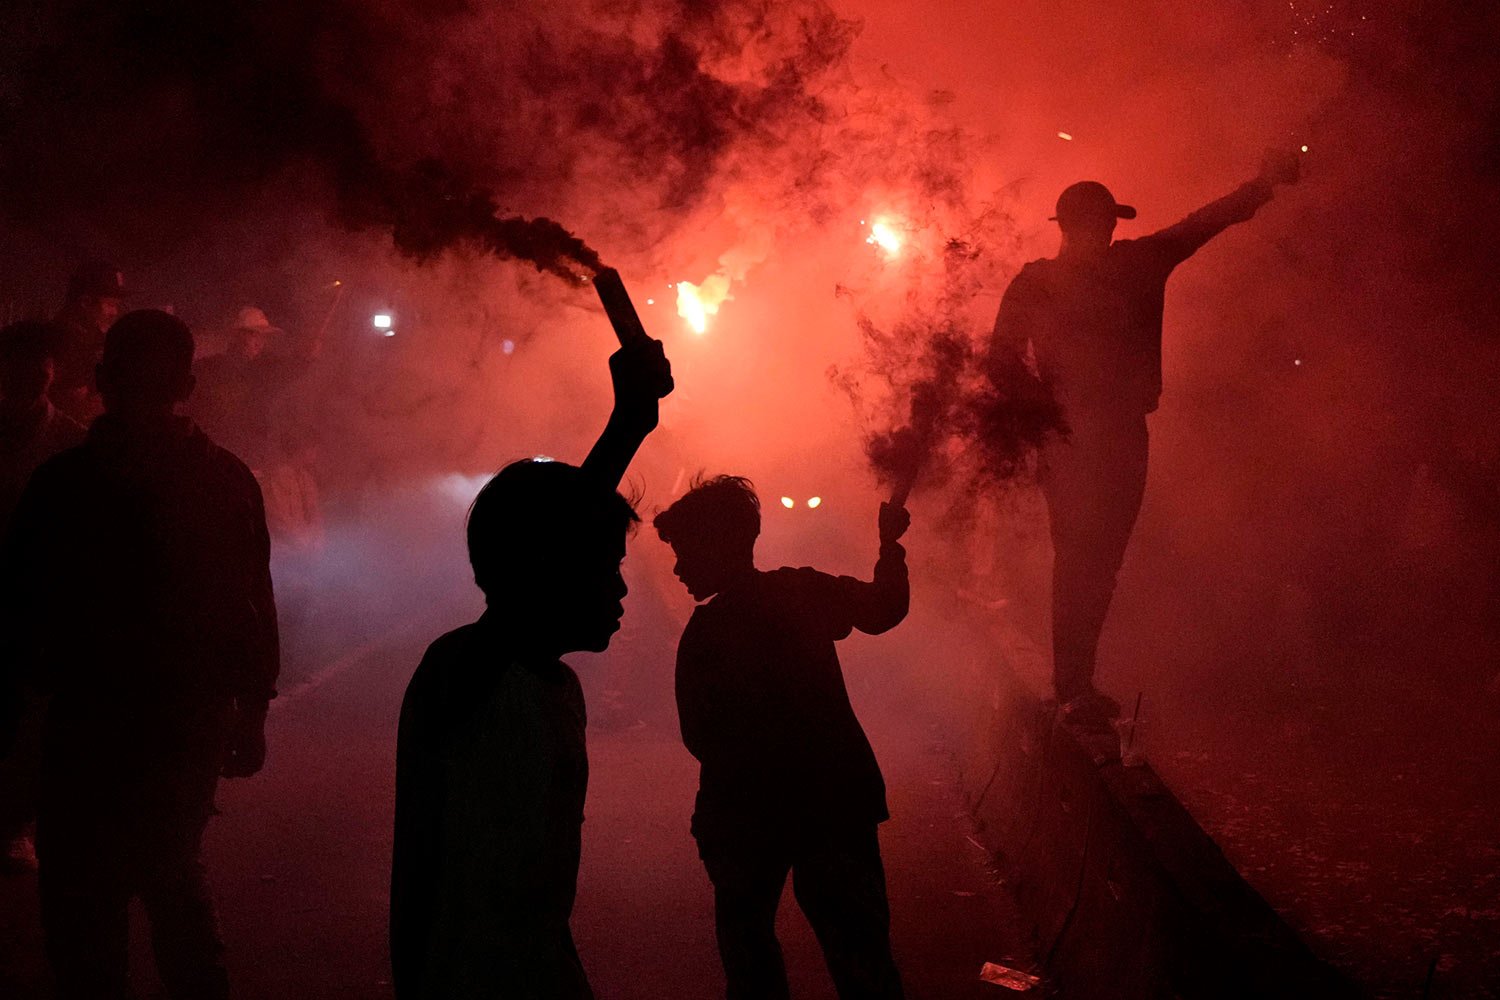  People light flares as they celebrate the eve of Eid al-Fitr, the holiday marking the end of the holy fasting month of Ramadan, on a street in Jakarta, Indonesia, Sunday, May 1, 2022. (AP Photo/Dita Alangkara) 